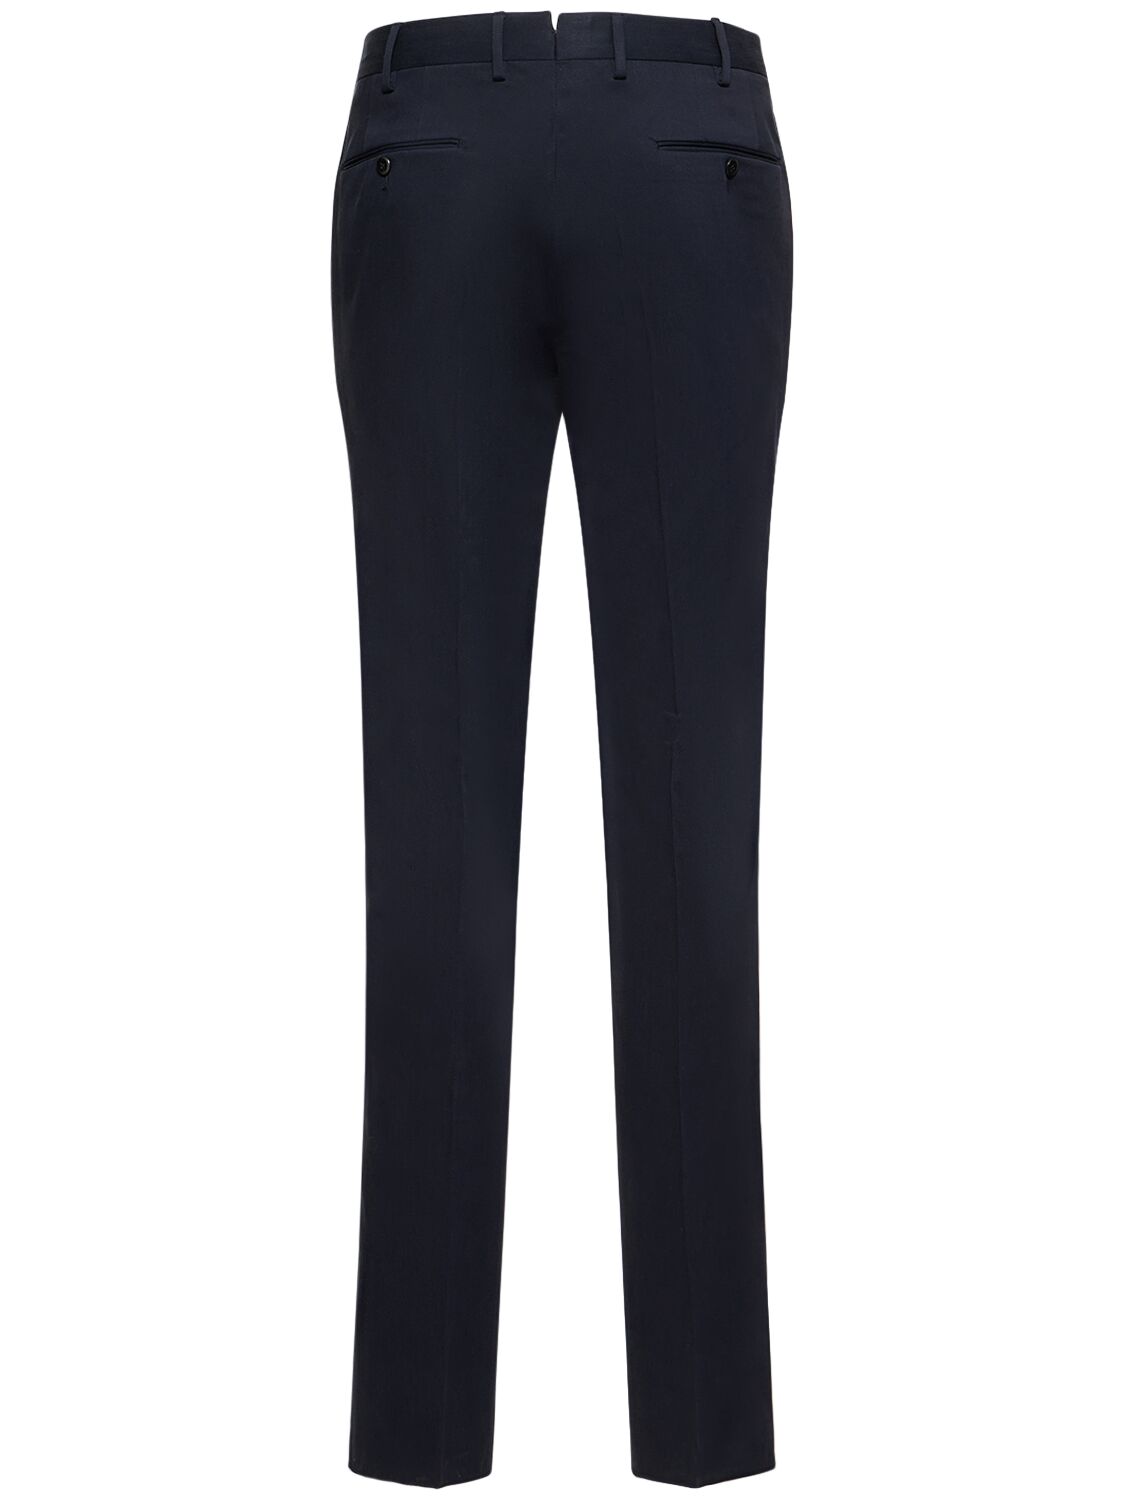 Shop Pt Torino Classic Cotton Blend Straight Pants In Navy